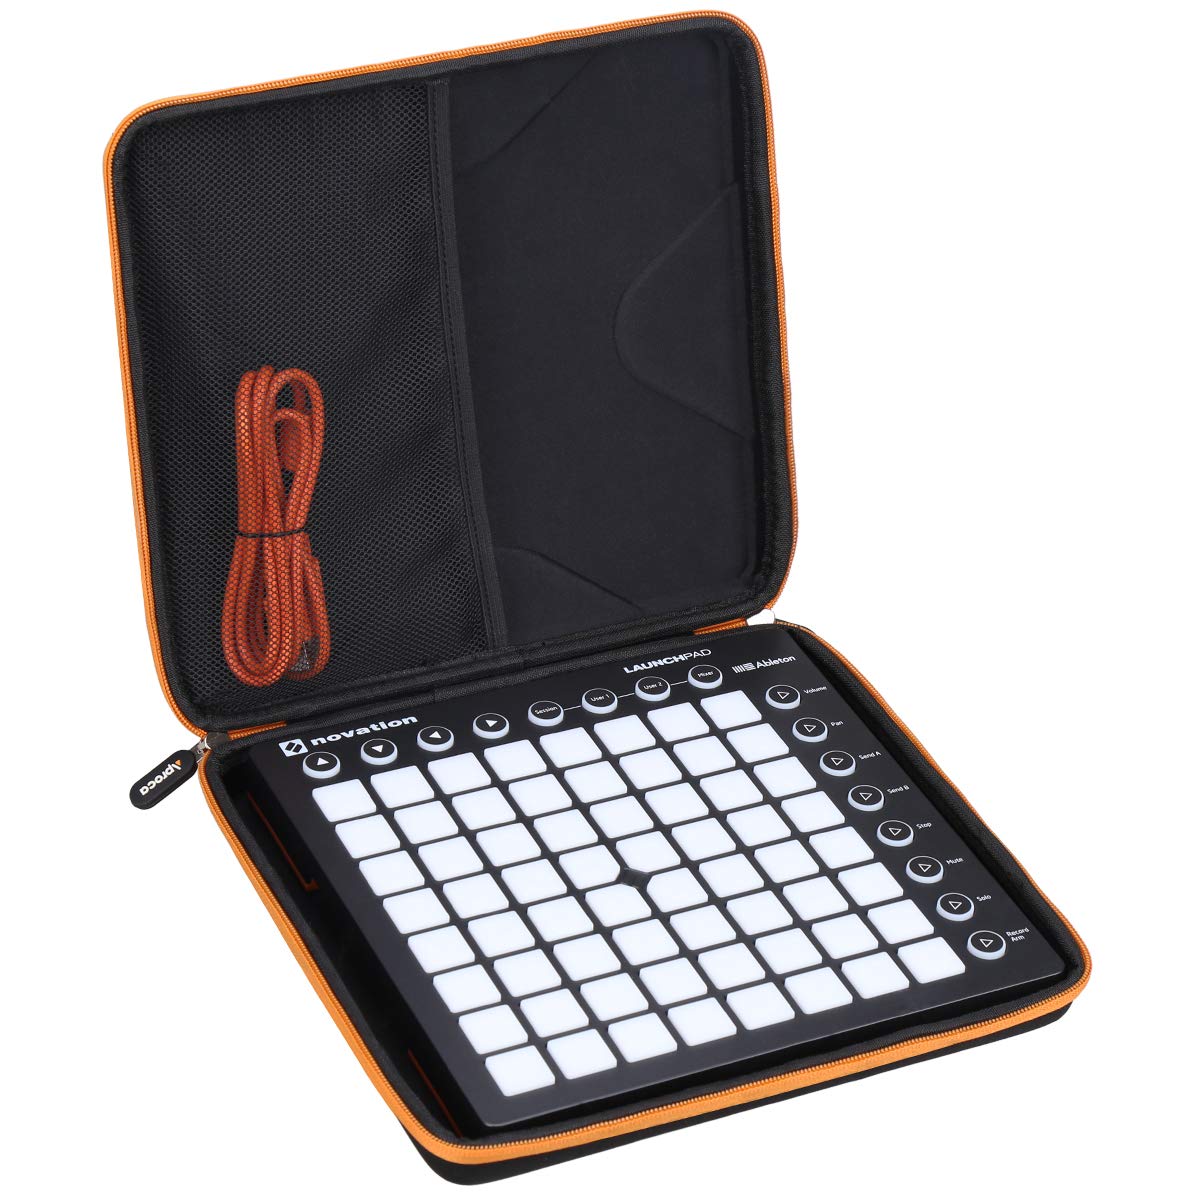 Aproca Hard Carry Travel Case For Novation Launchpad MK2 Ableton Live Controller